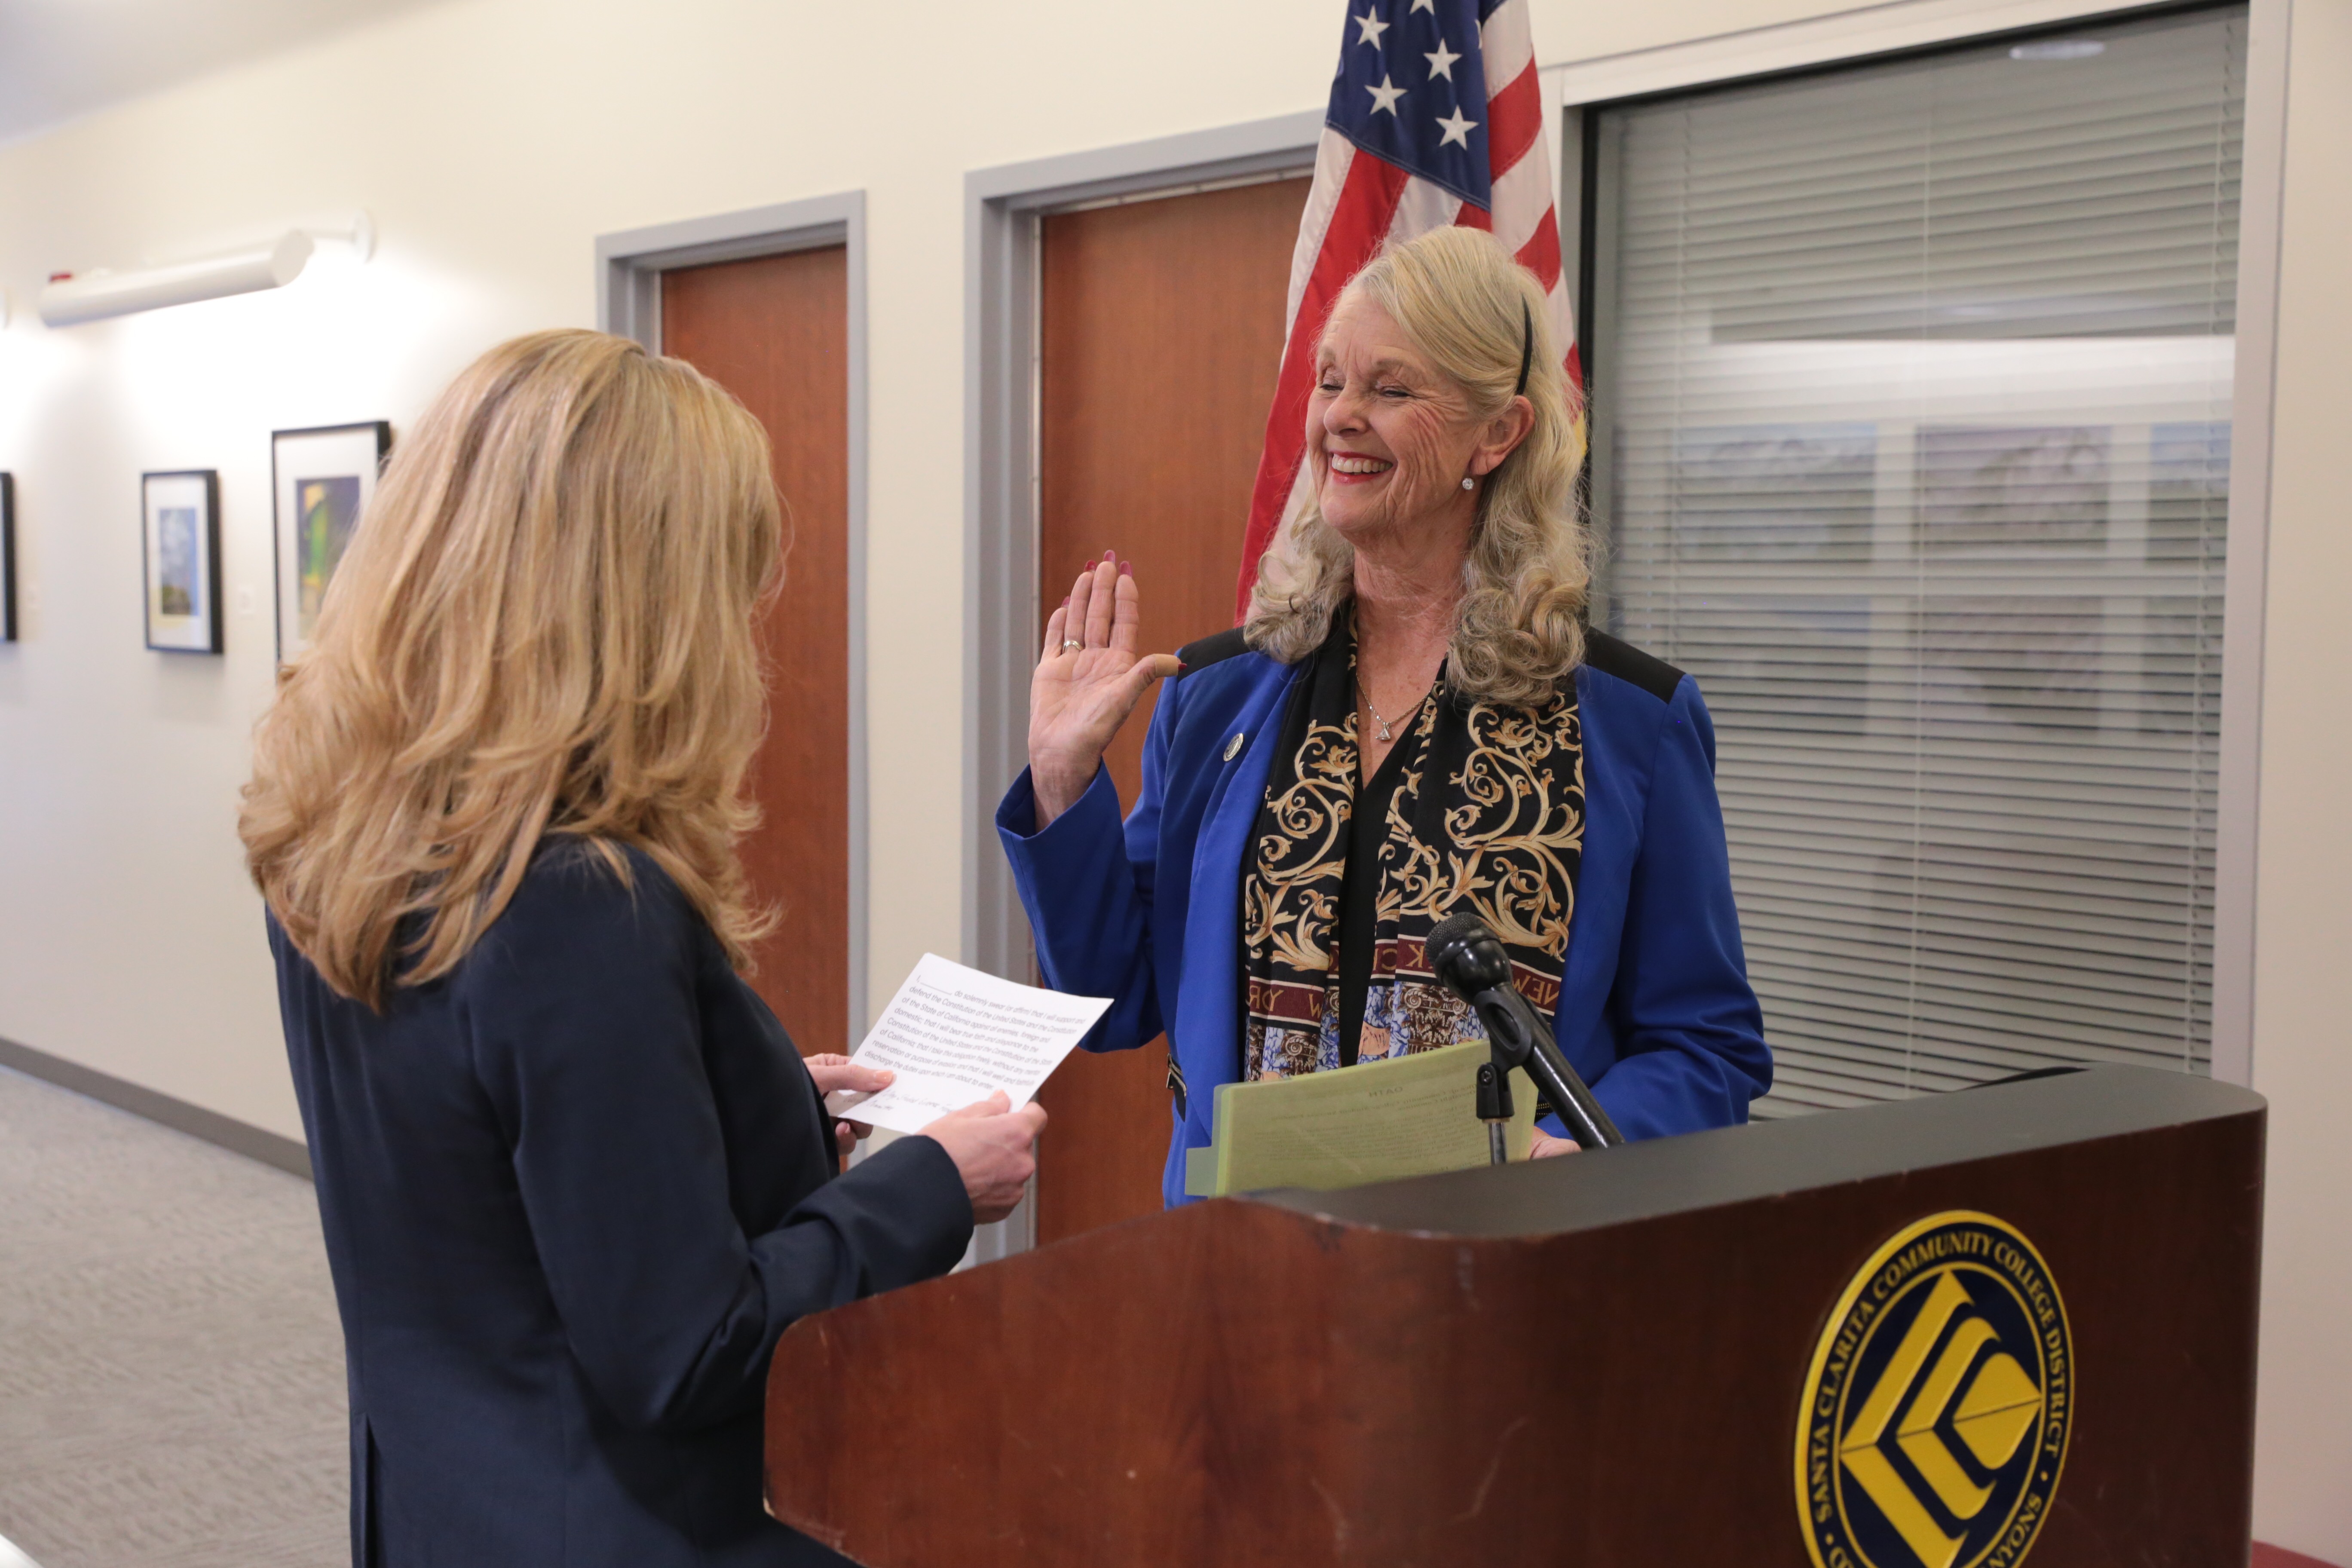 Chancellor Van Hook is sworn in by Assemblywoman Christy Smith.